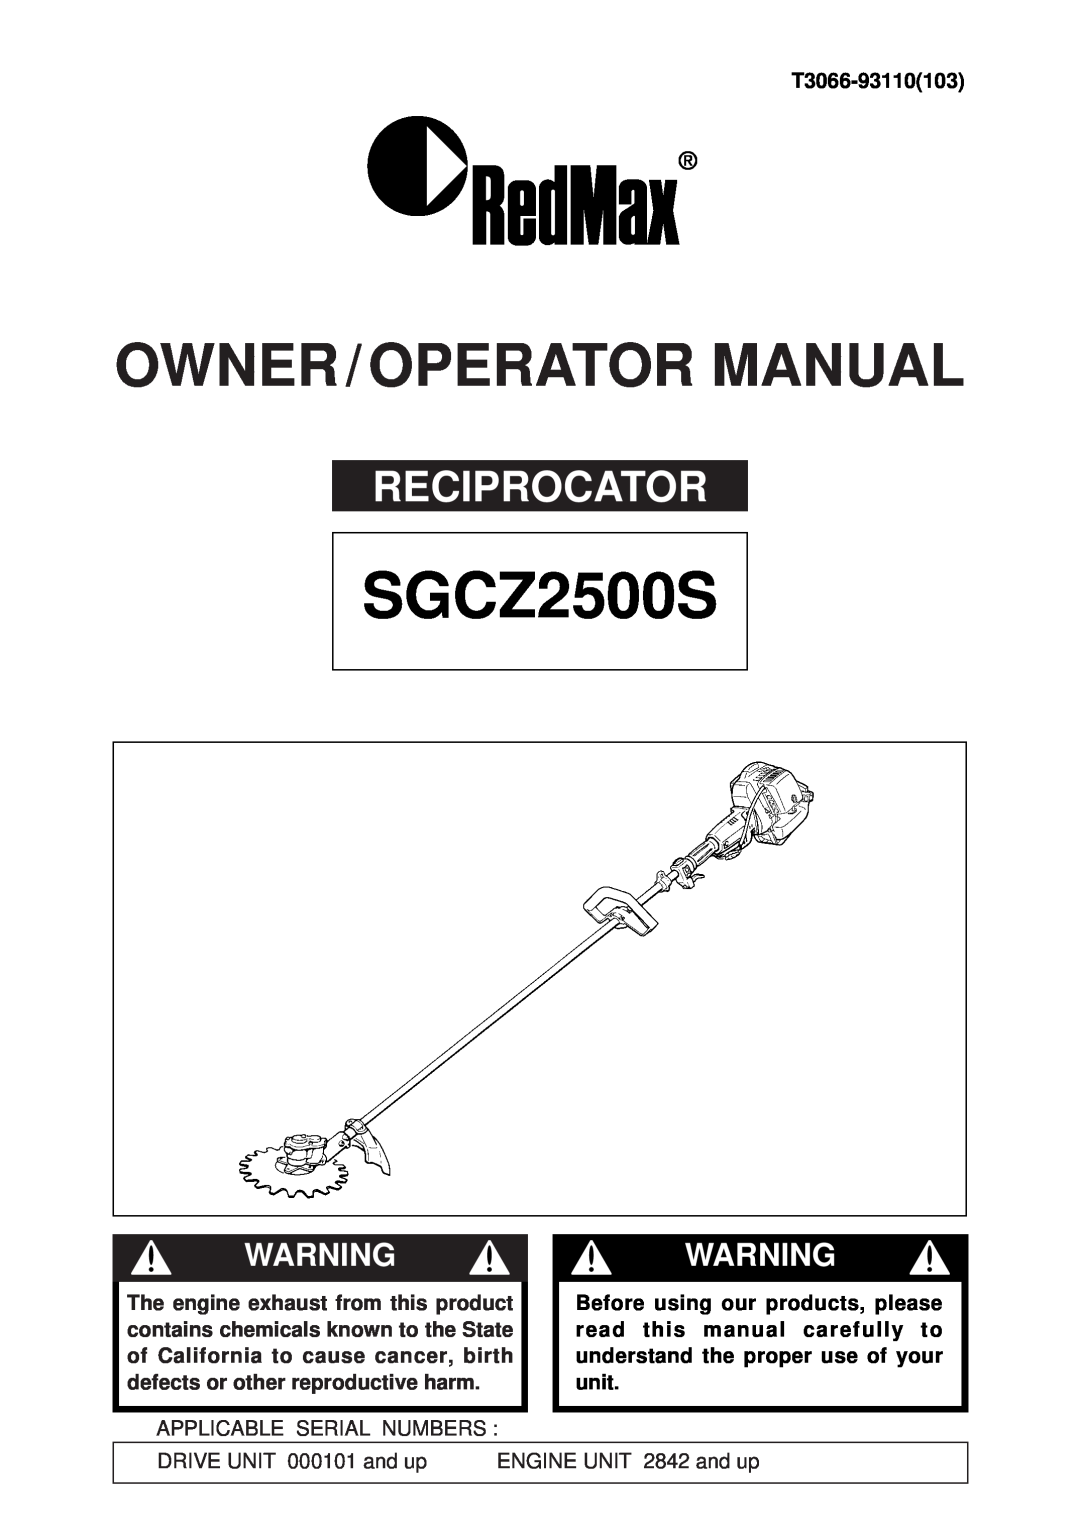 RedMax PSZ2500, SGCZ2500S, SGCX2600S manual Lrt-A, Trimmer Attachment, Owner / Operator Manual, LRT-AApplicable Model 